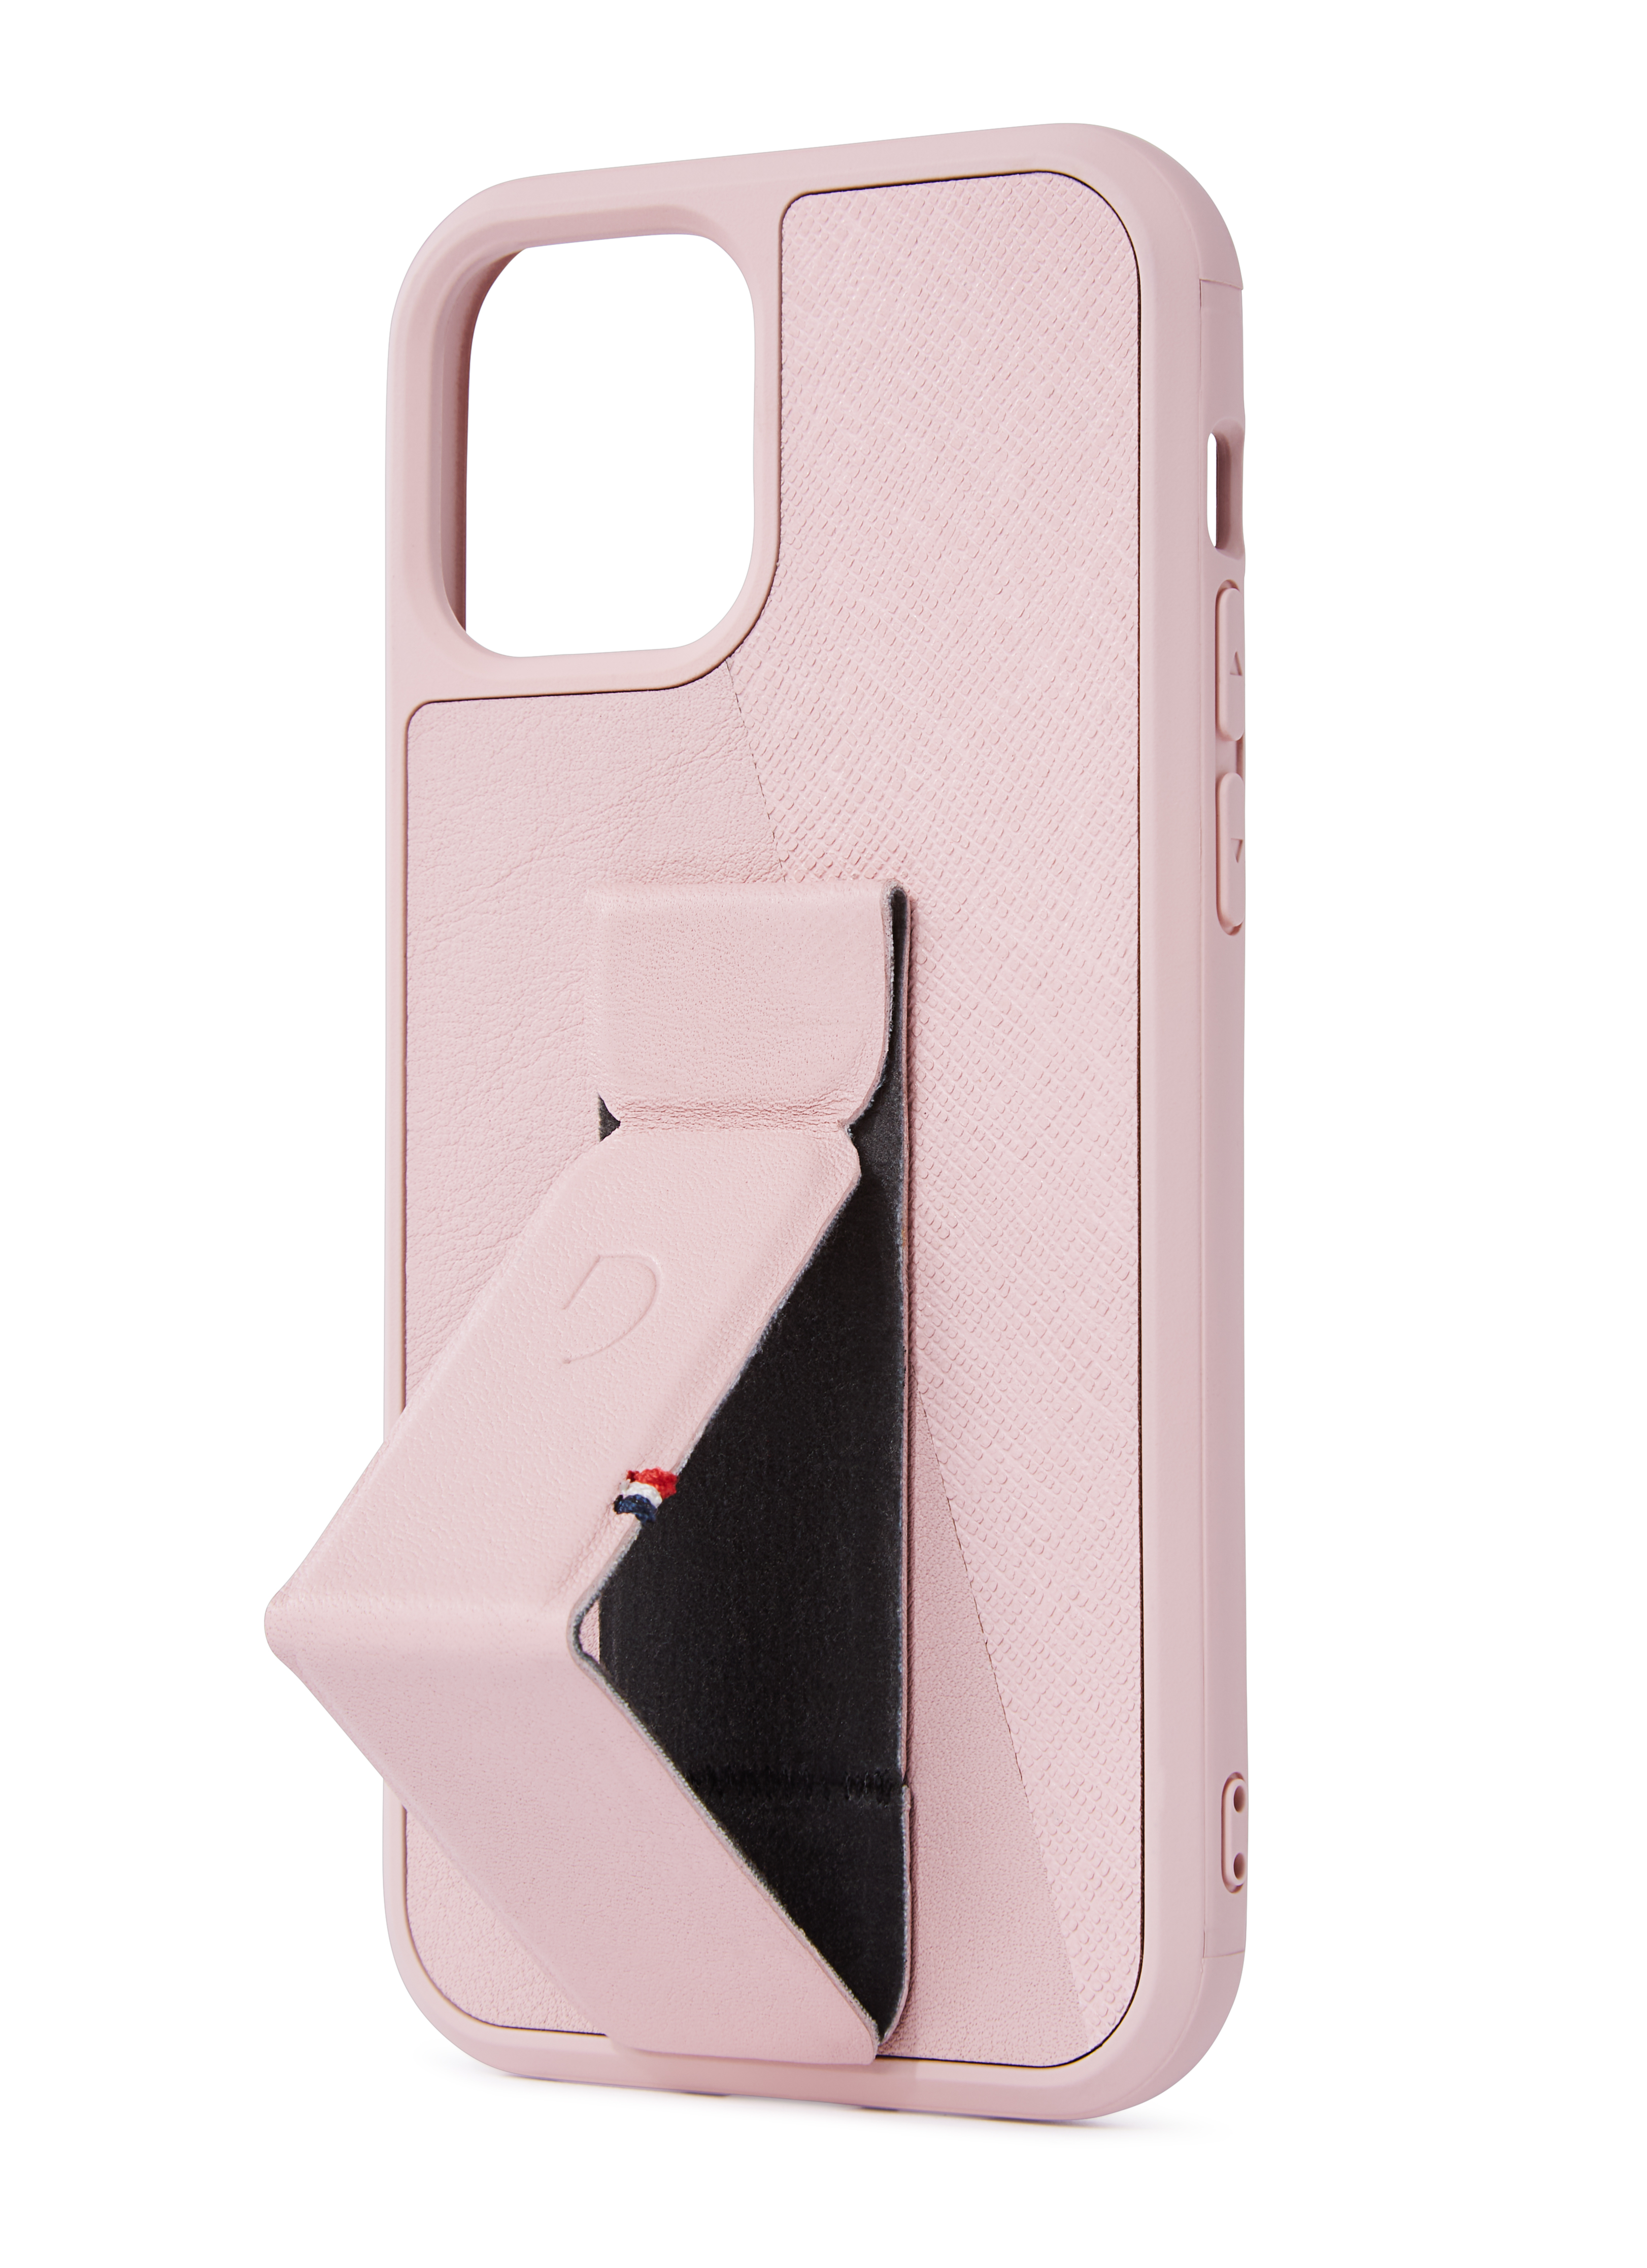 Apple, iPhone DECODED iPhone Pro Case, inch), Backcover, / Stand (6.1 Silberrosa 12 12